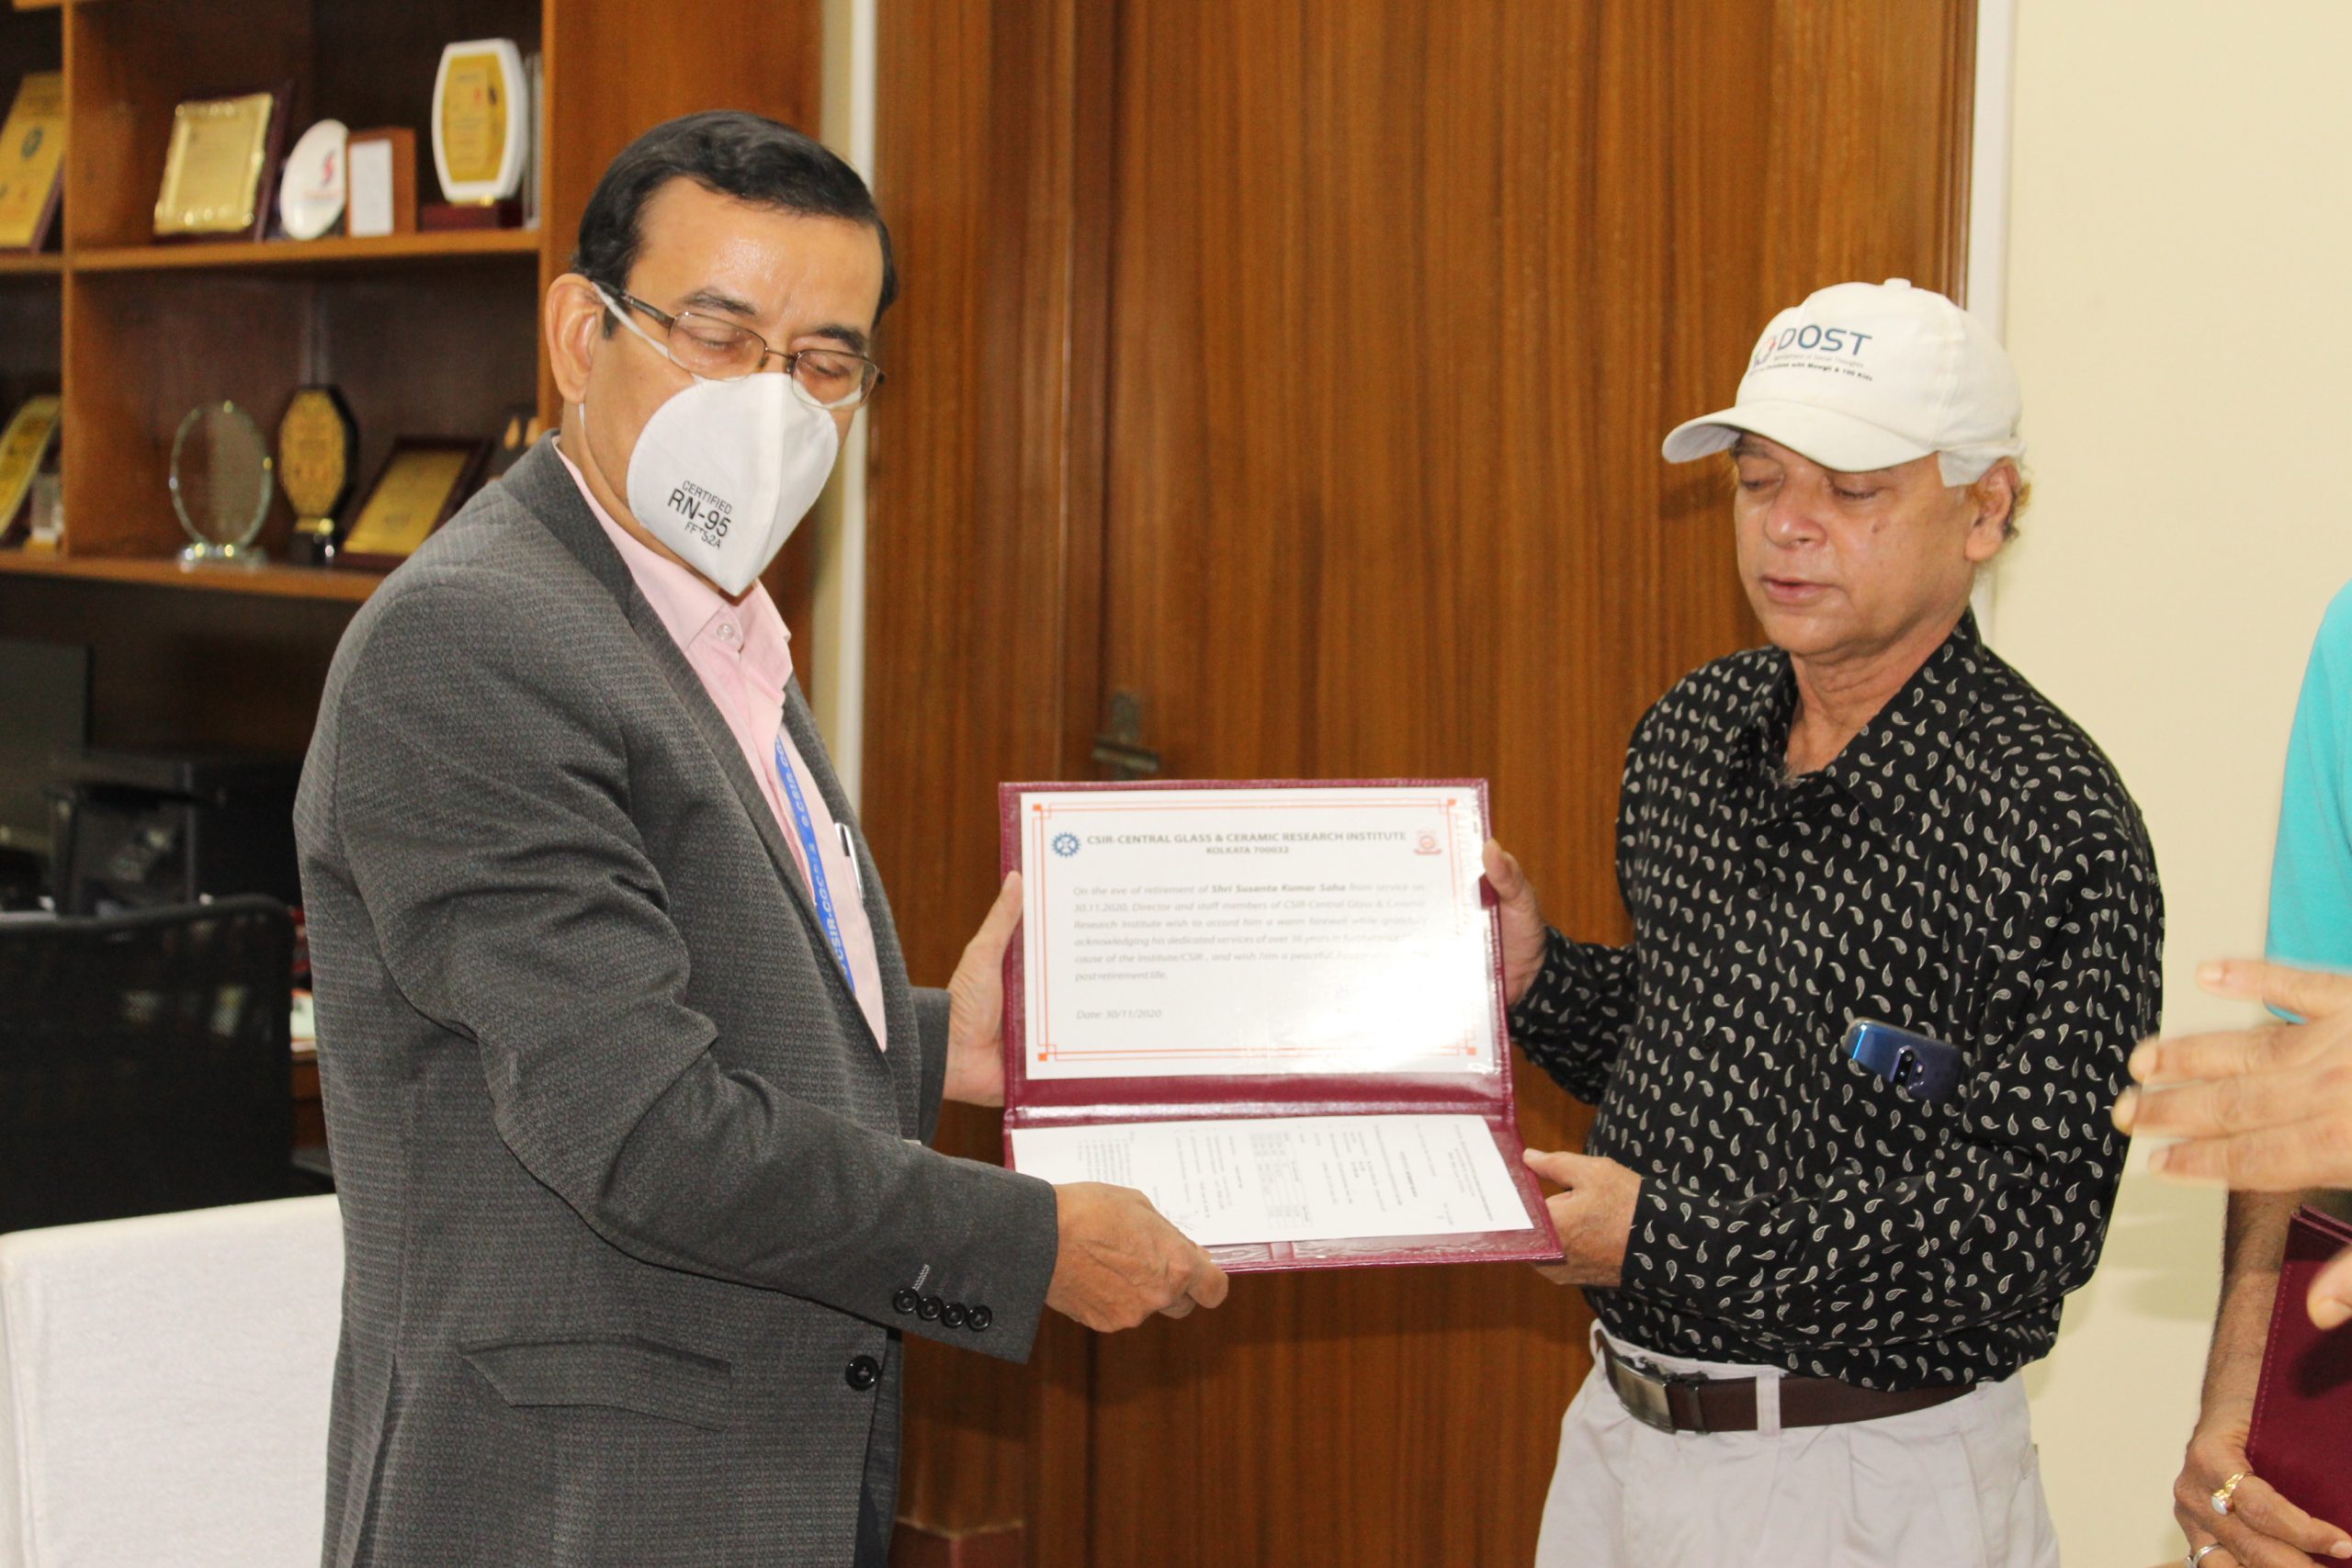 Acting Director presenting the Cetificate to Sri Sushanta Kumar Saha, Assistant Section Officer upon superannuation from Council Service in November, 2020